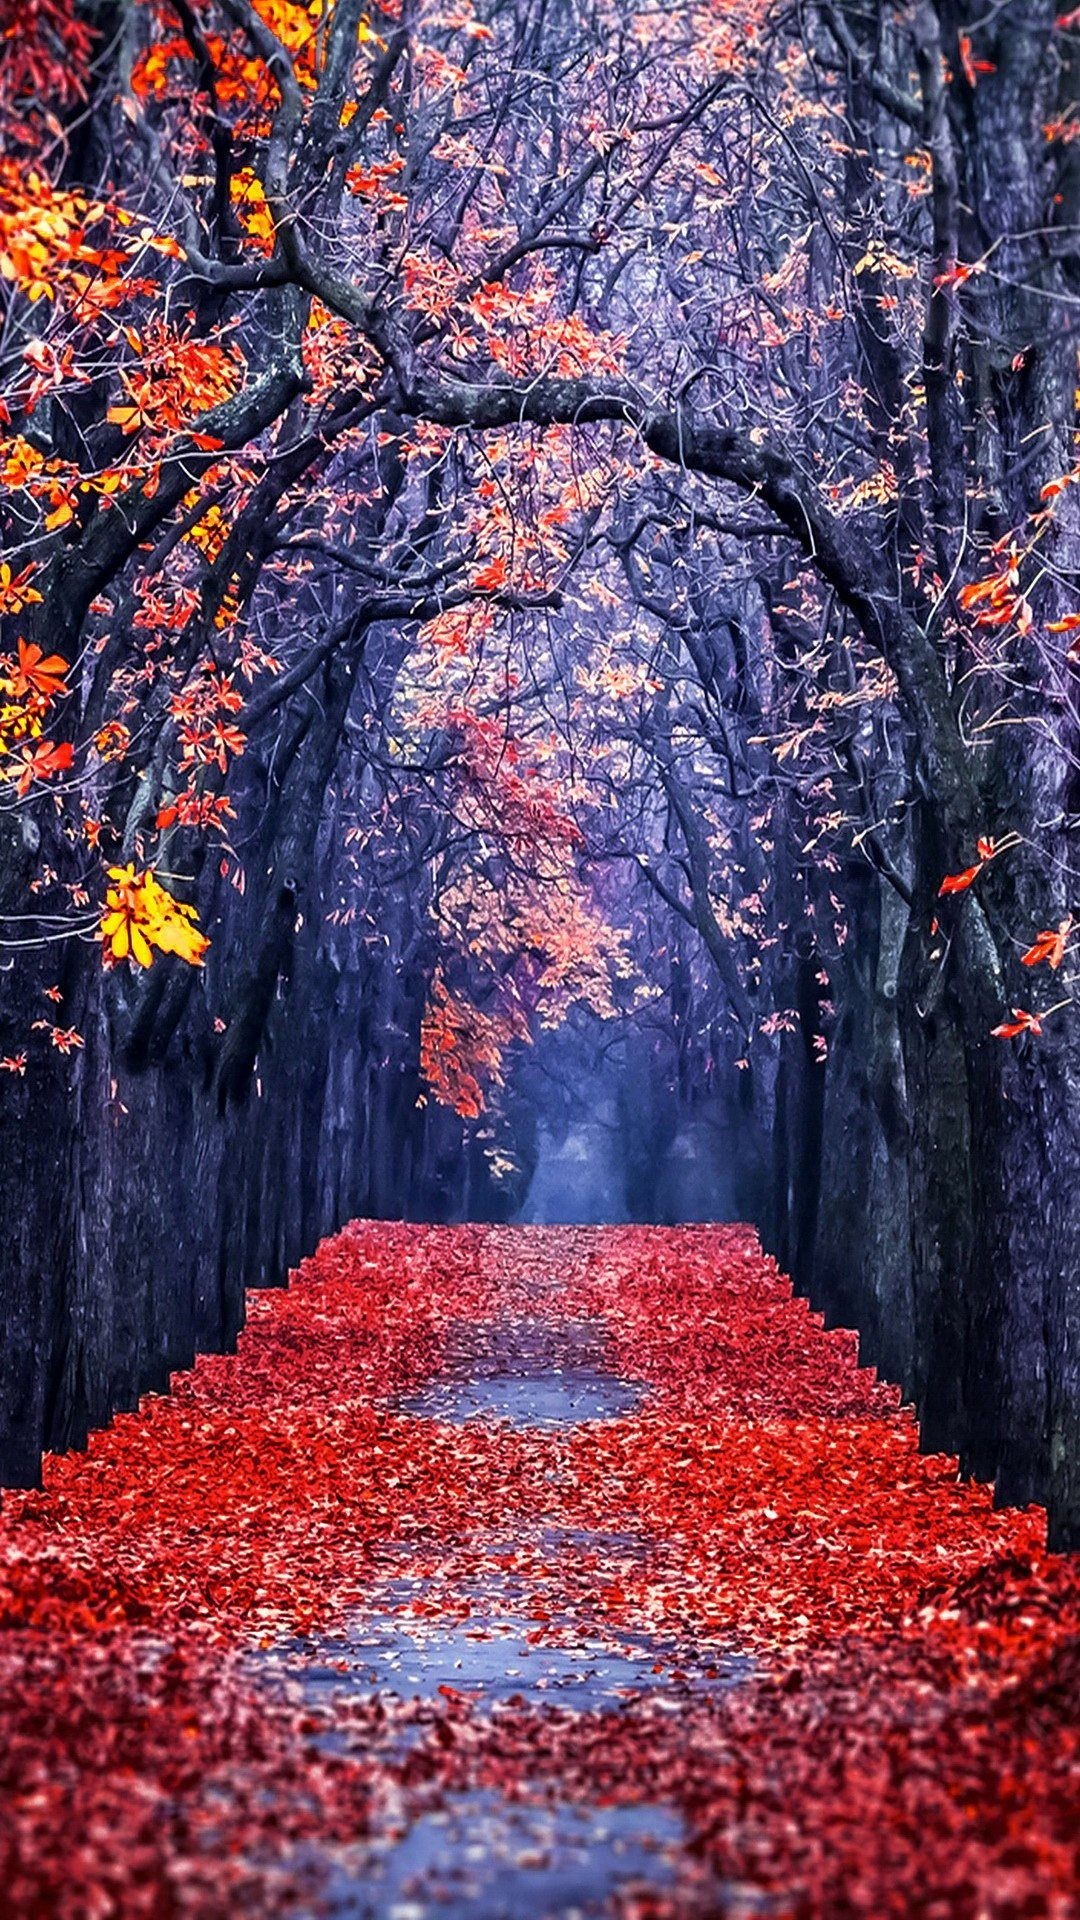 1080x1920 25 best ideas about <b>Fall</b> background on Pinterest |